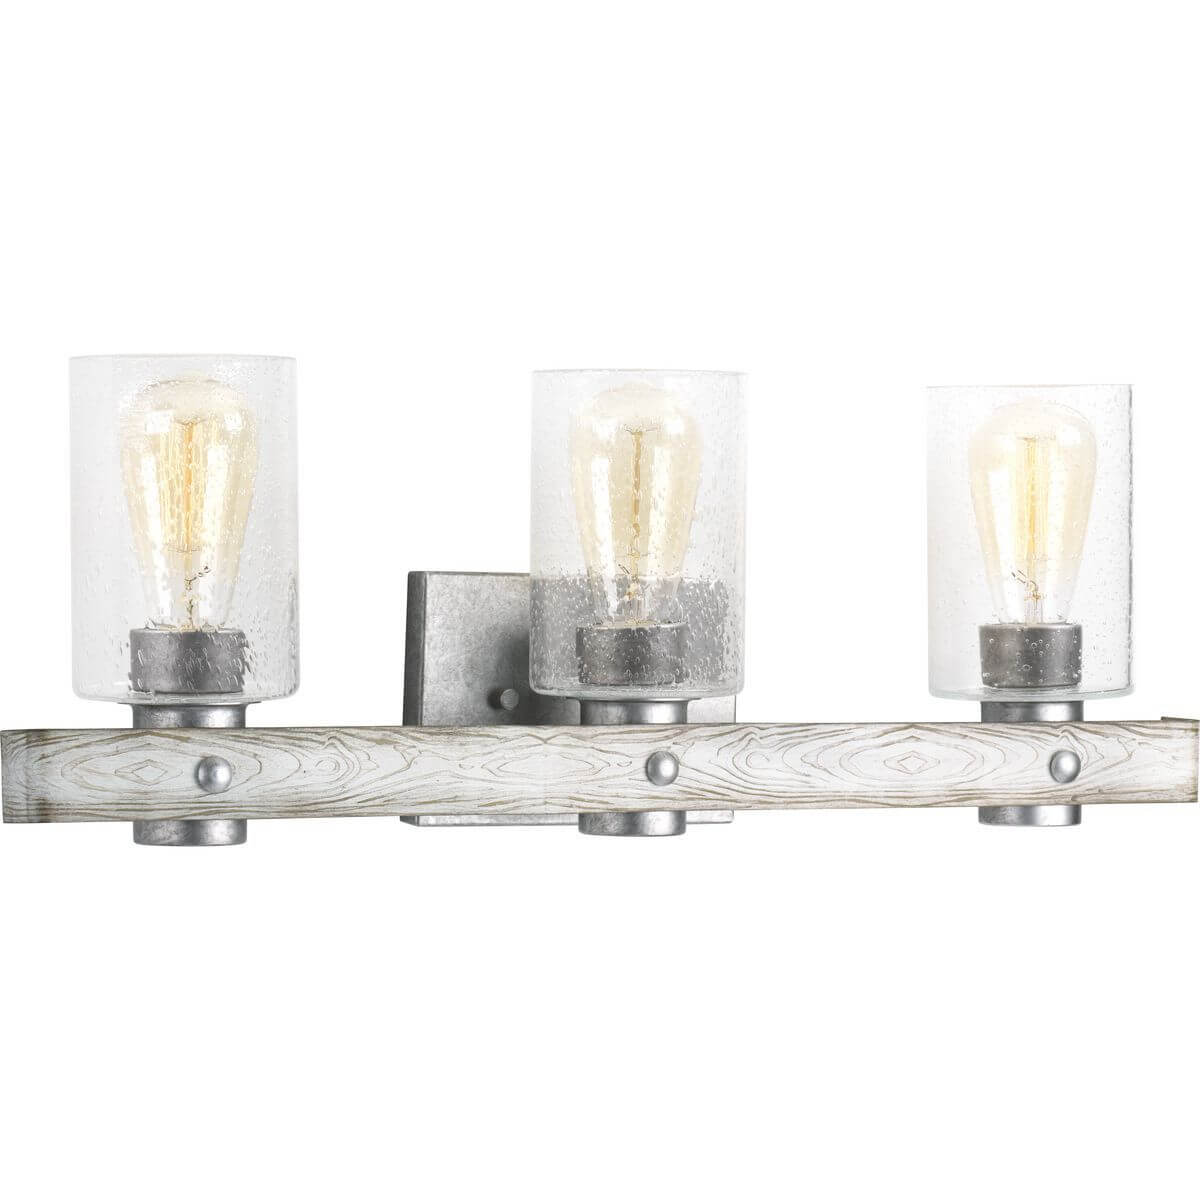 Progress Lighting P300125-141 Gulliver 3 Light 24 inch Bath Vanity Light in Galvanized with Clear Seeded Glass